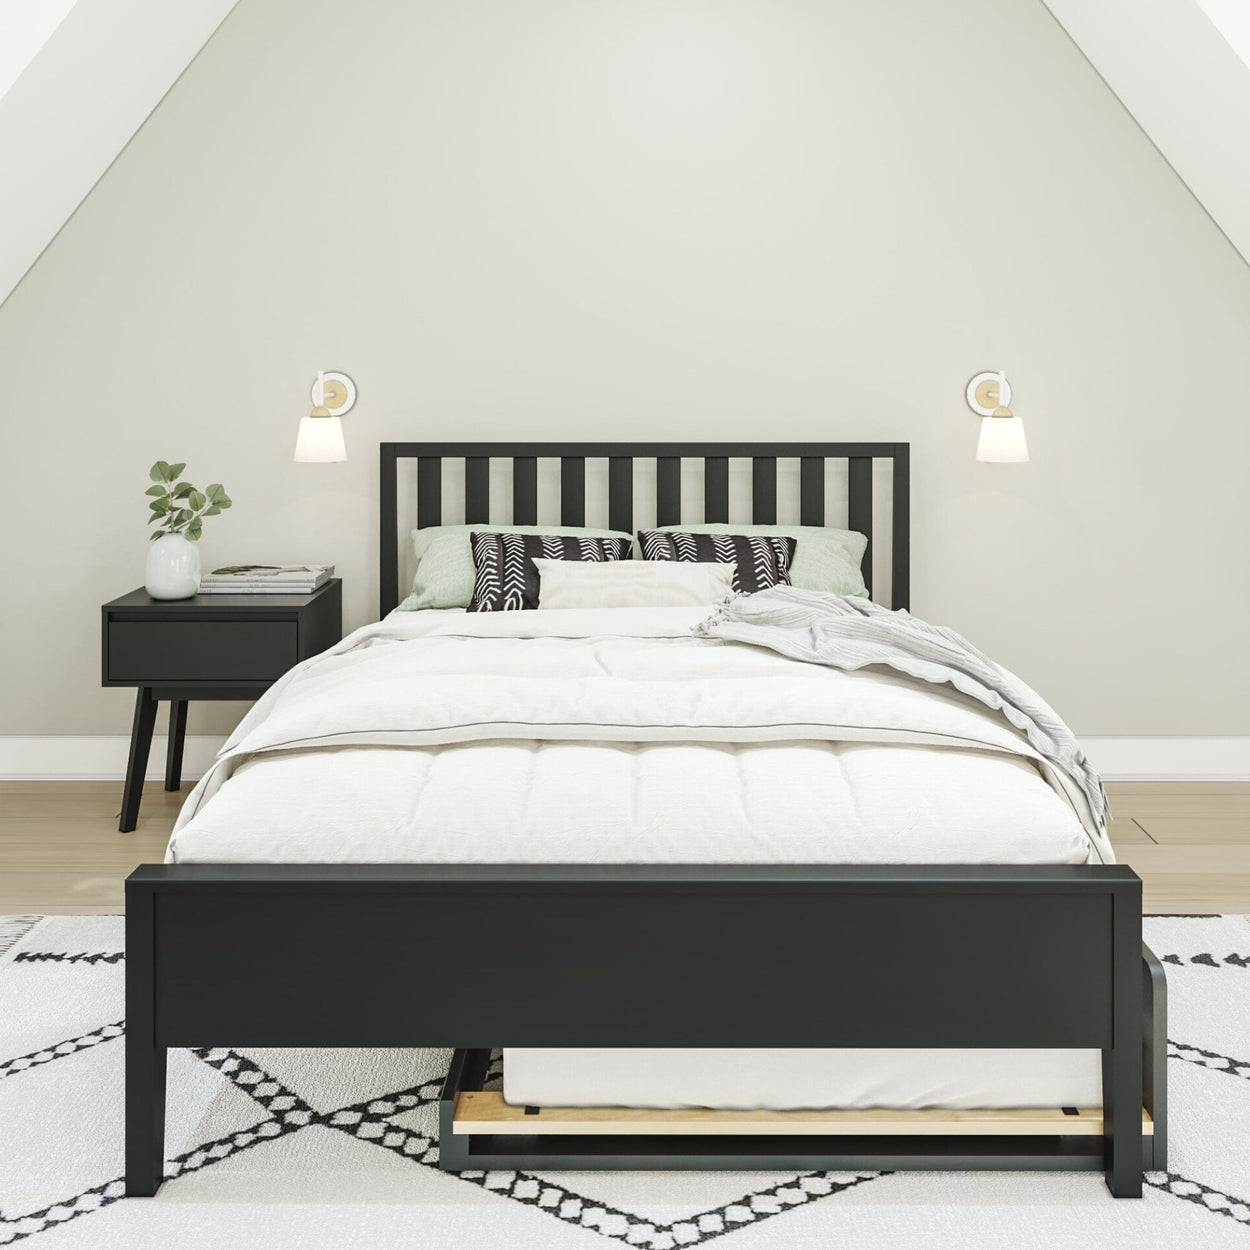 216211-170 : Kids Beds Scandinavian Full-Size Bed with Twin-Size Trundle, Black